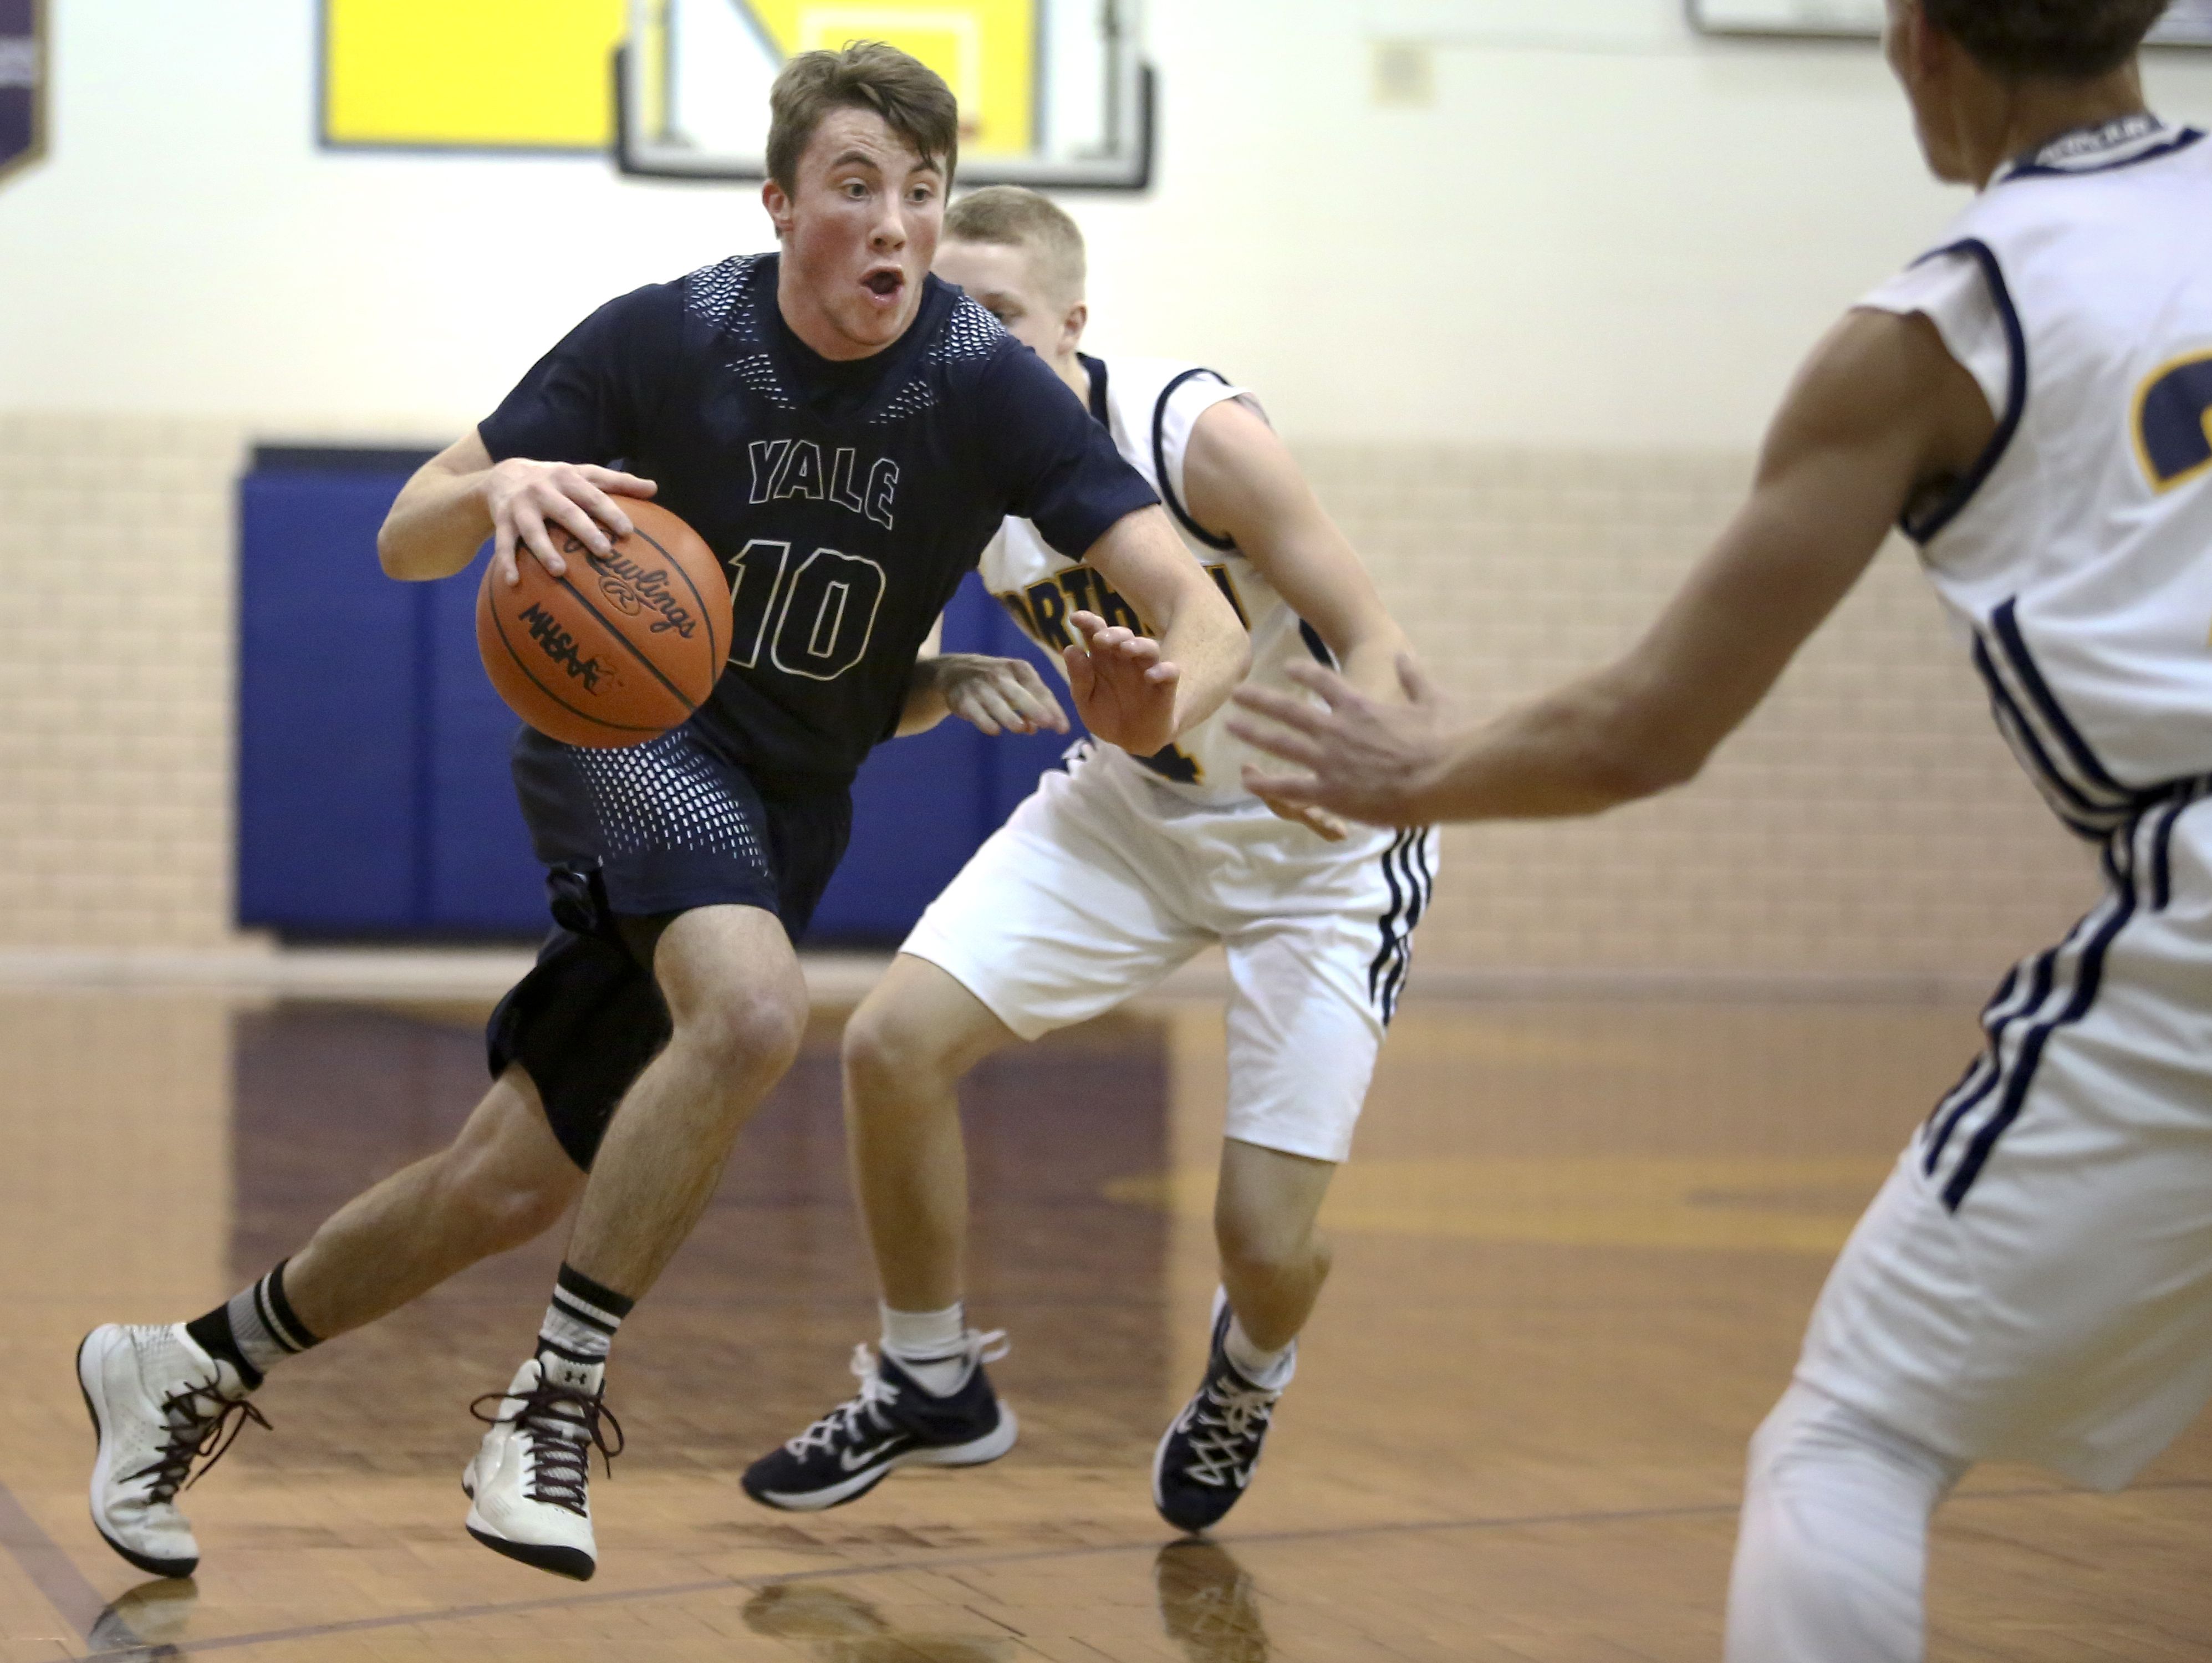 Yale senior Cody Kegley drives the ball down court during a basketball game Tuesday, Jan. 5, 2016 at Port Huron Northern High School.